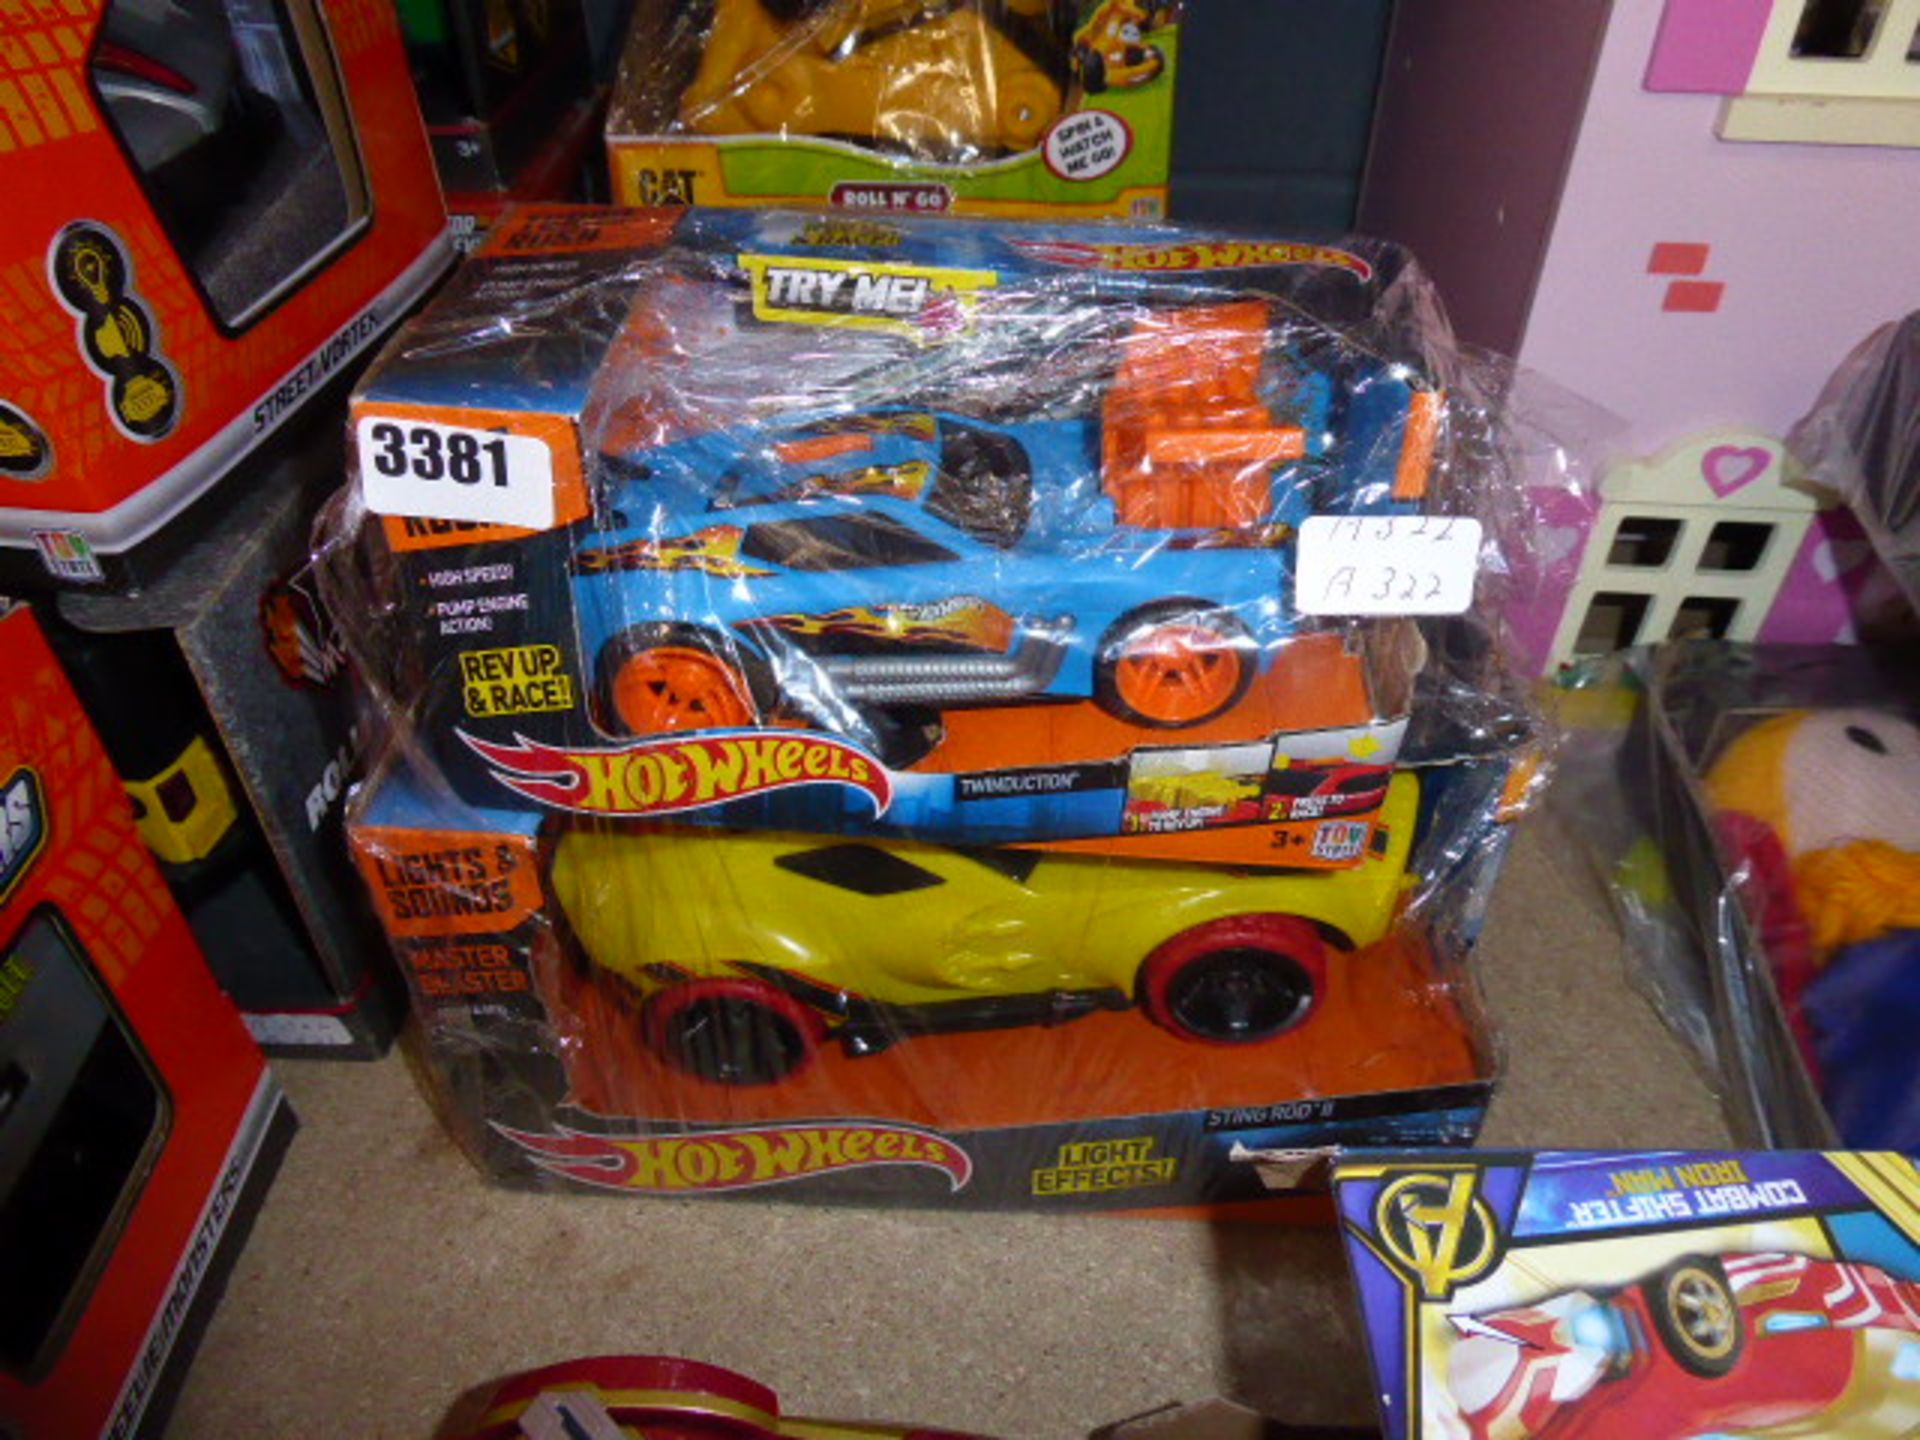 Two Hot Wheel cars